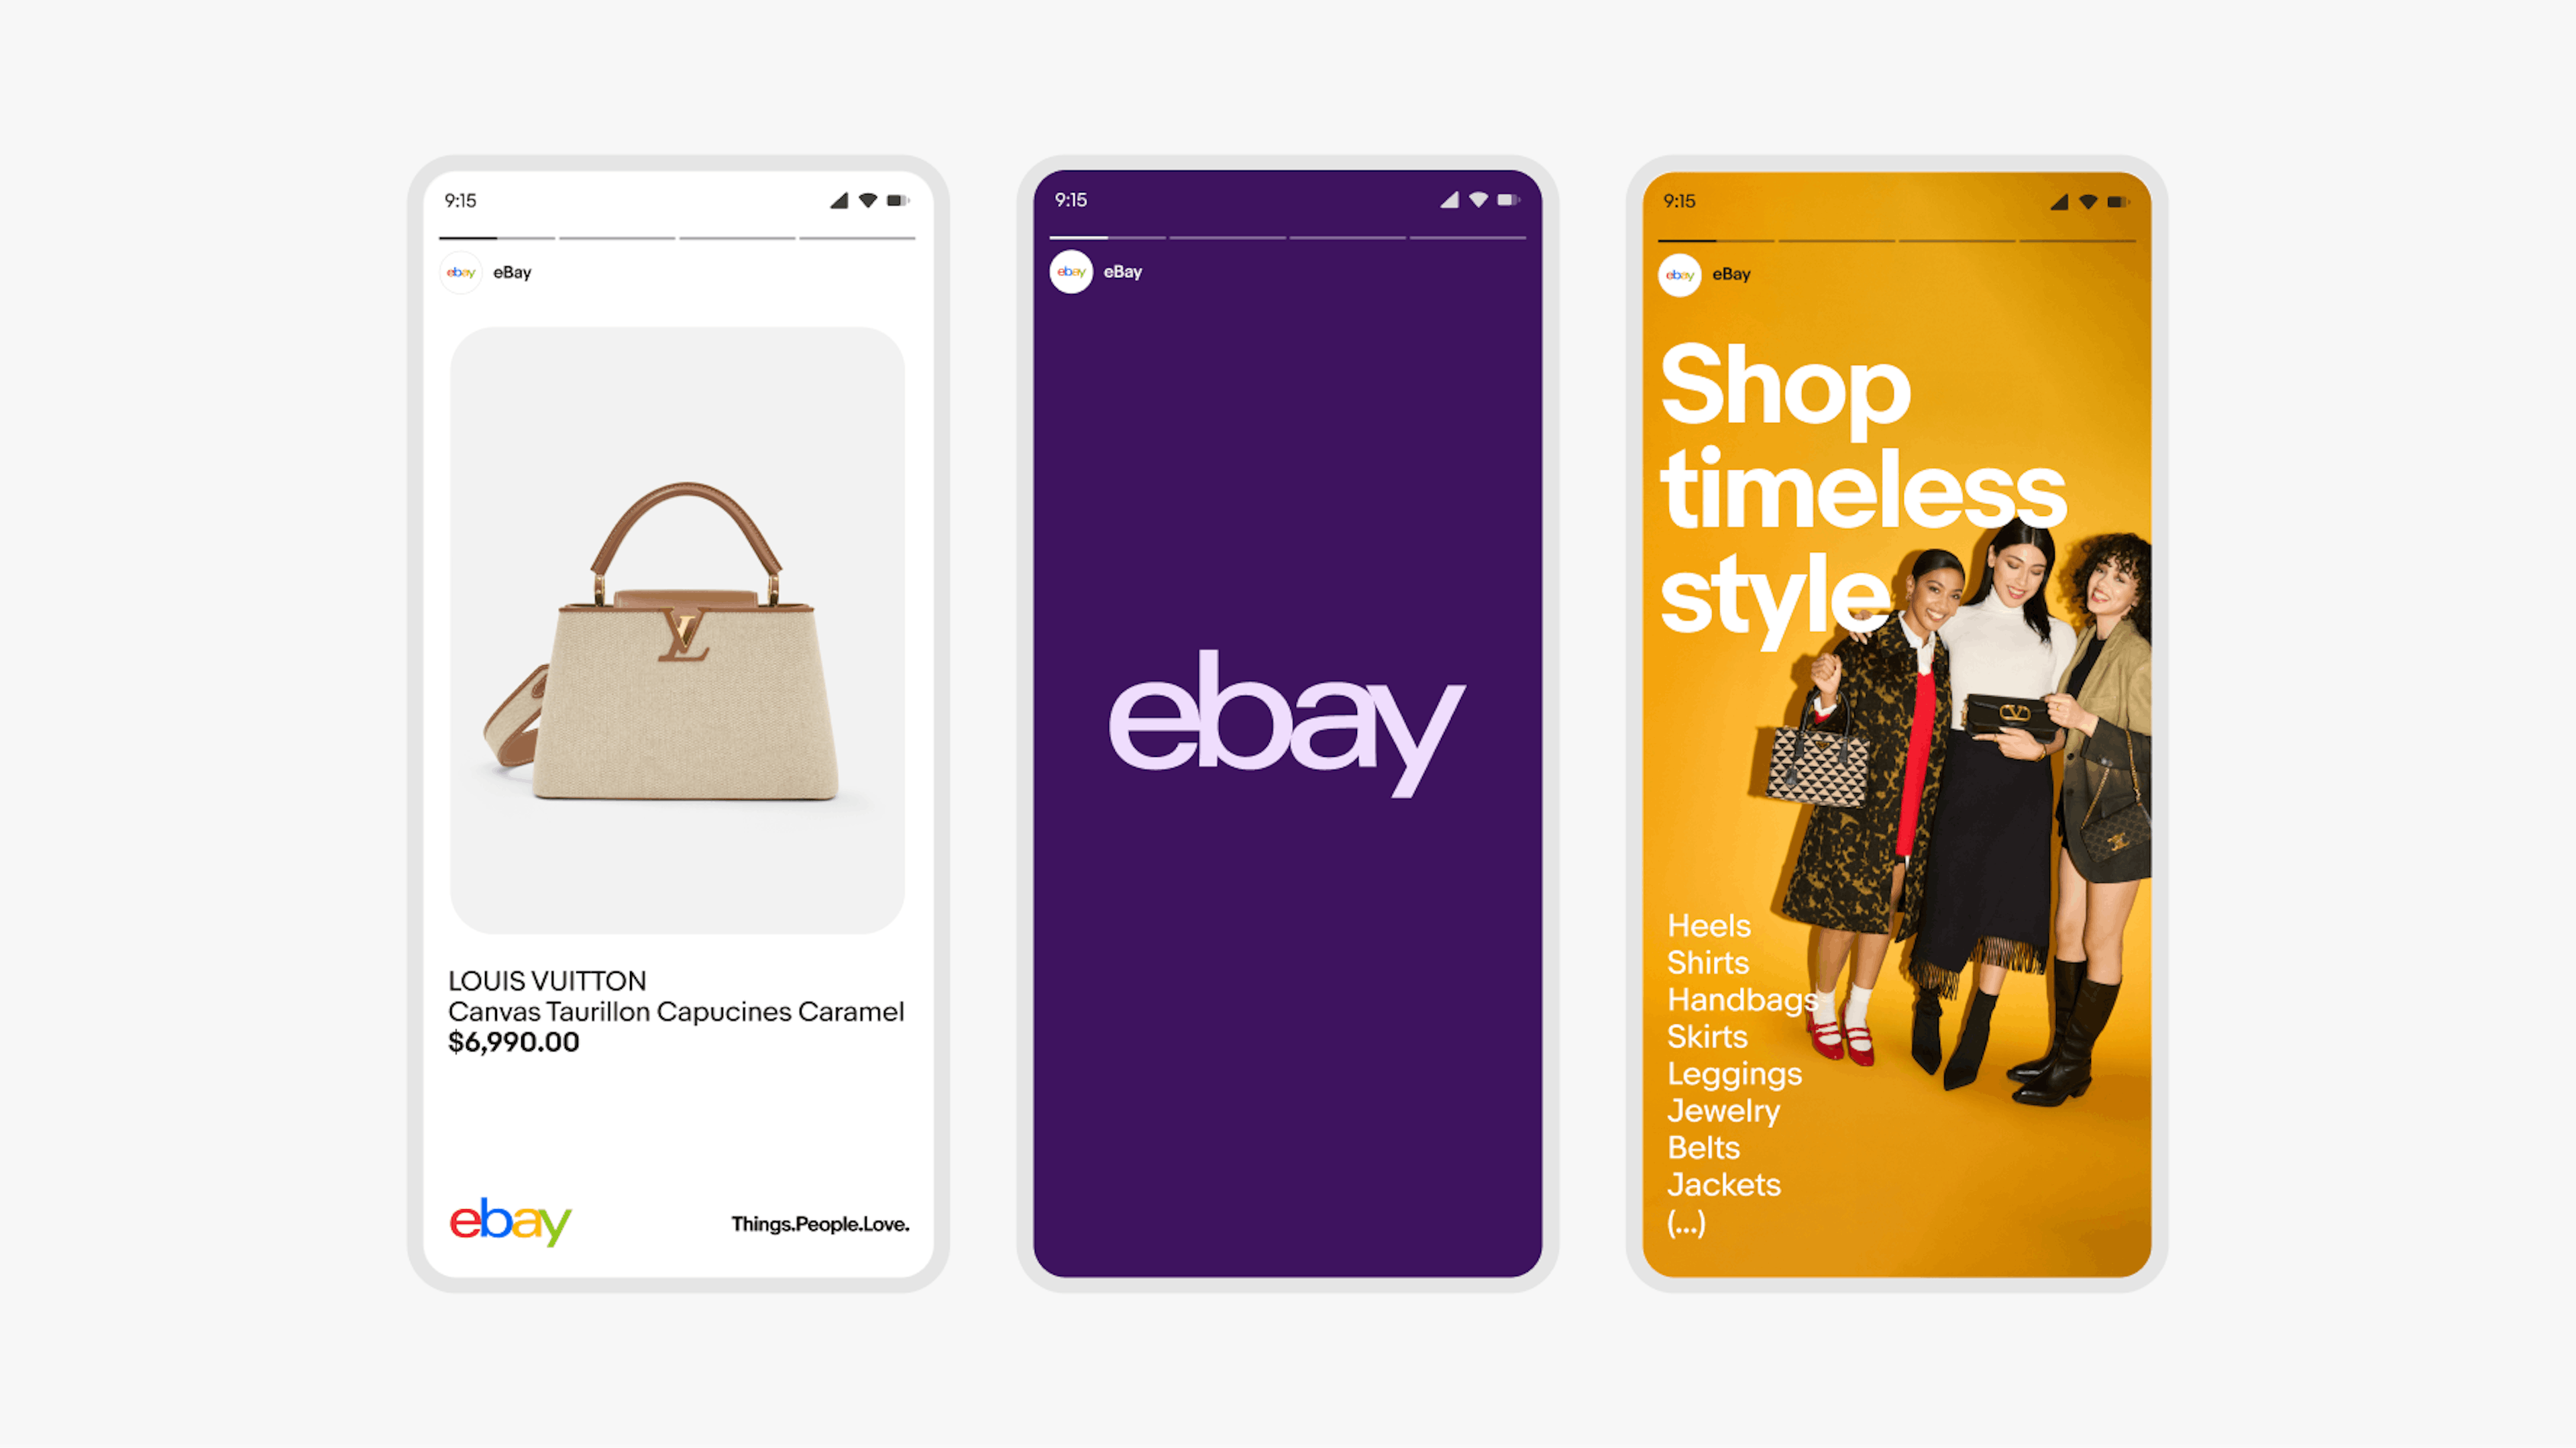 Three fashion-inspired social media story designs. The first highlights a bag in an item tile-style layout. The second is the eBay logo over a vibrant purple background. The third has the text “Shop timeless style” over an image of 3 women holding luxury bags in front of a vibrant yellow background.